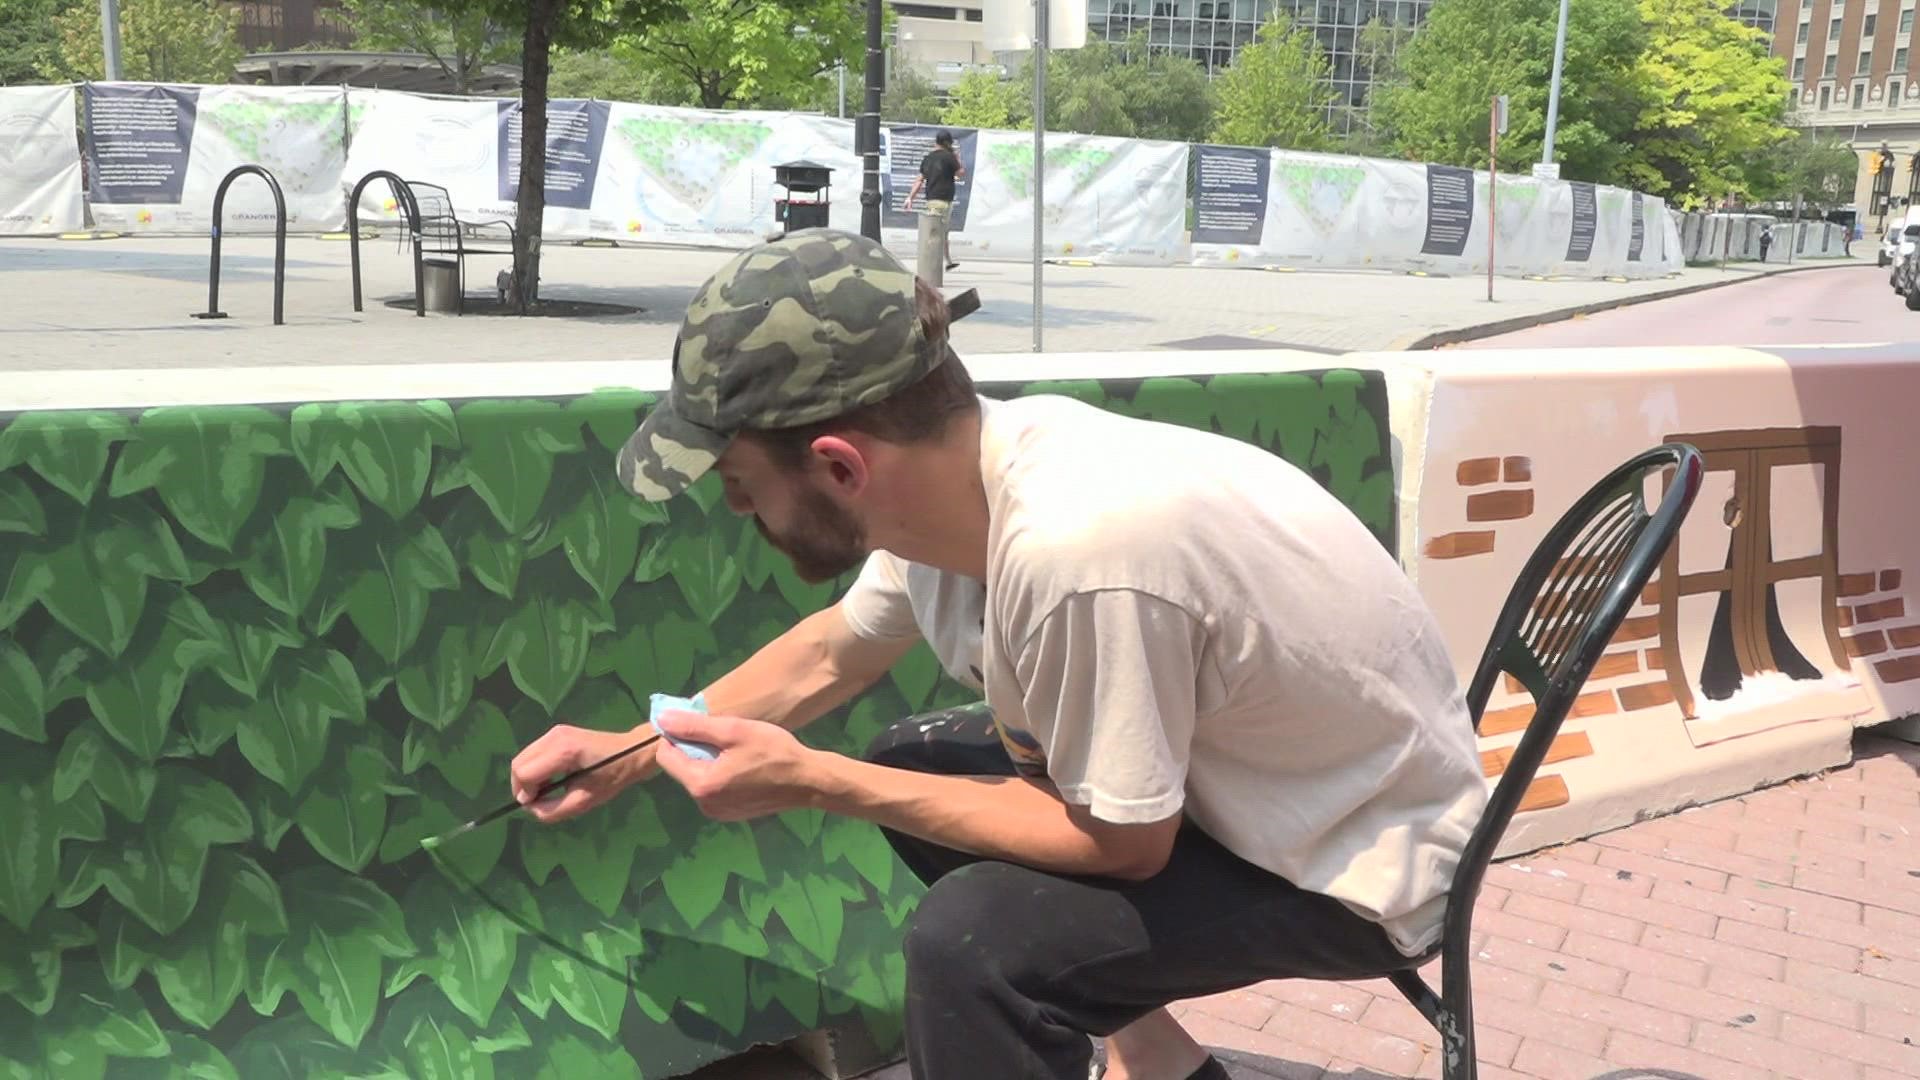 More than 40 artists will be working to paint the barricades over the next month.